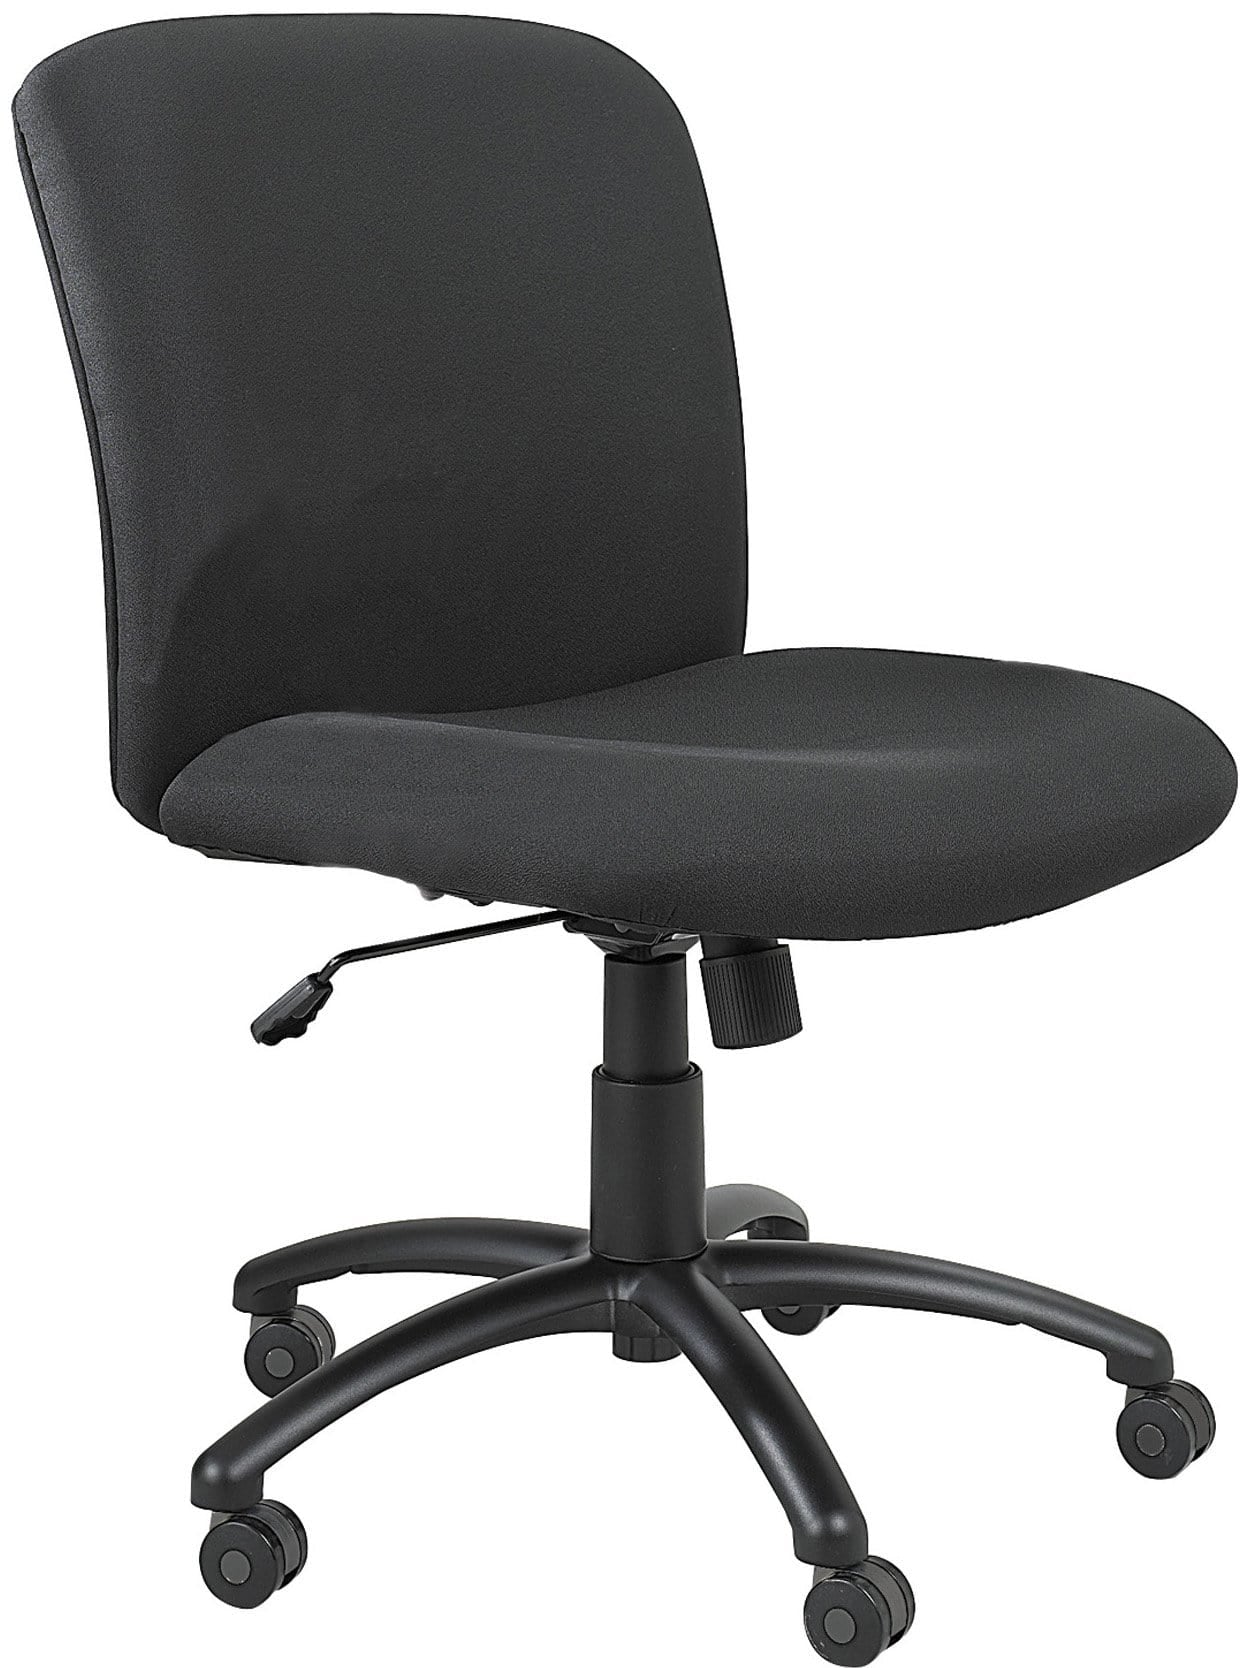 Adjustable Height Work or Home Office Weight Capacity Tilt 500 lbs Safco Big and Tall High Back Rolling Swivel Task Desk Chair Padded Arms Black Bonded Leather Seat